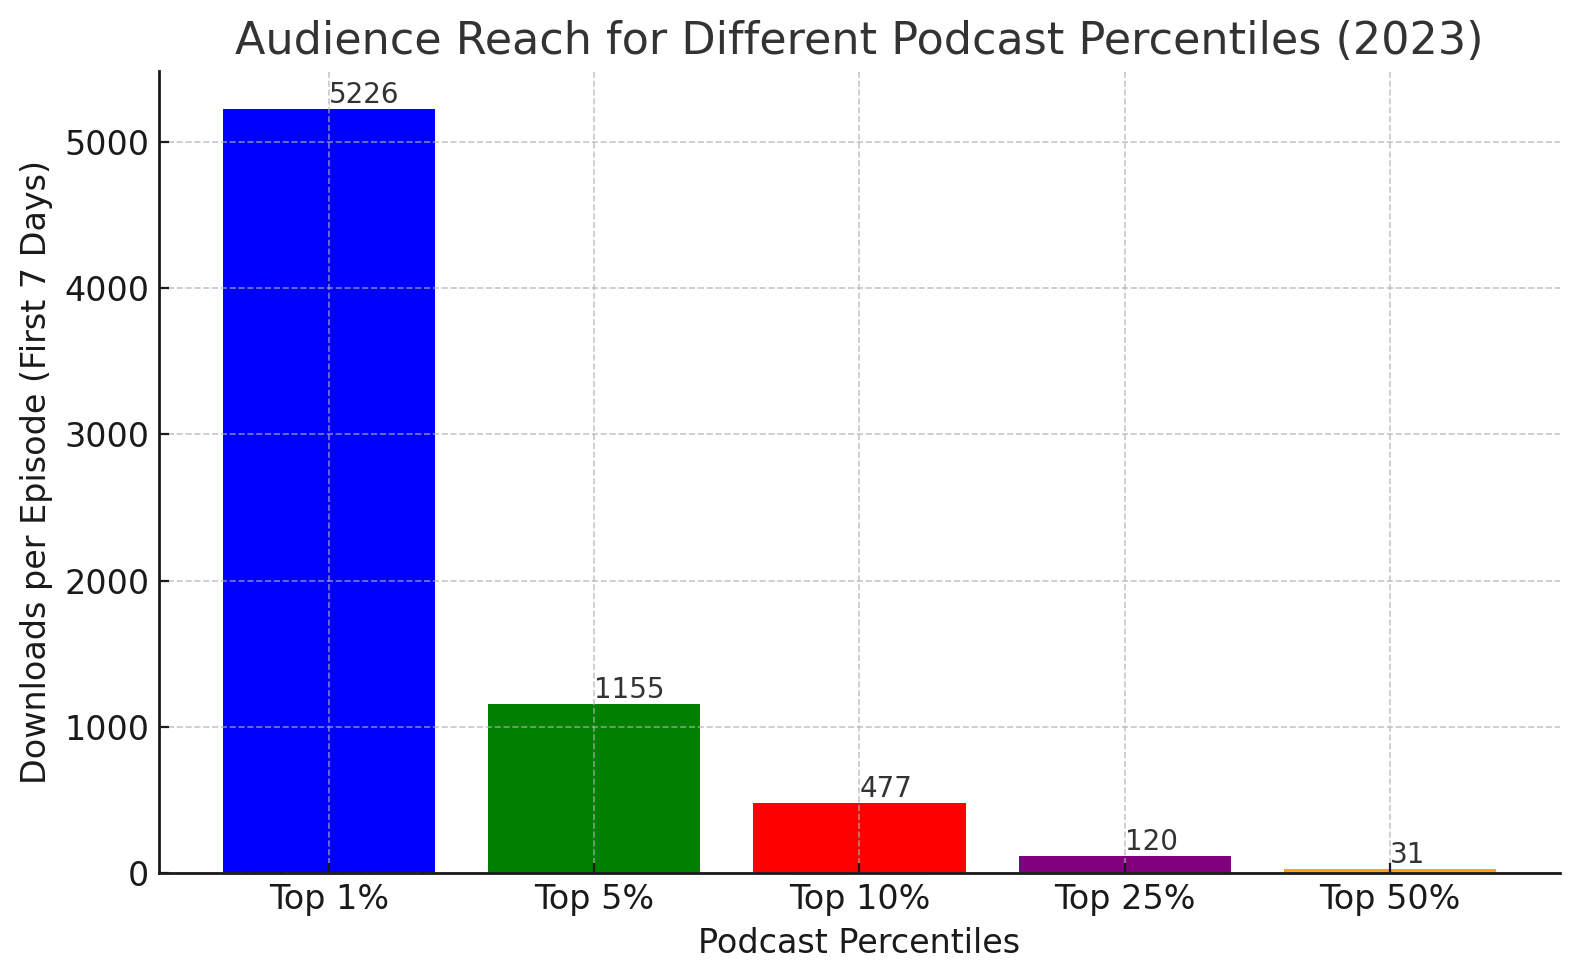 Global Rank of Podcasts and Listenershiop